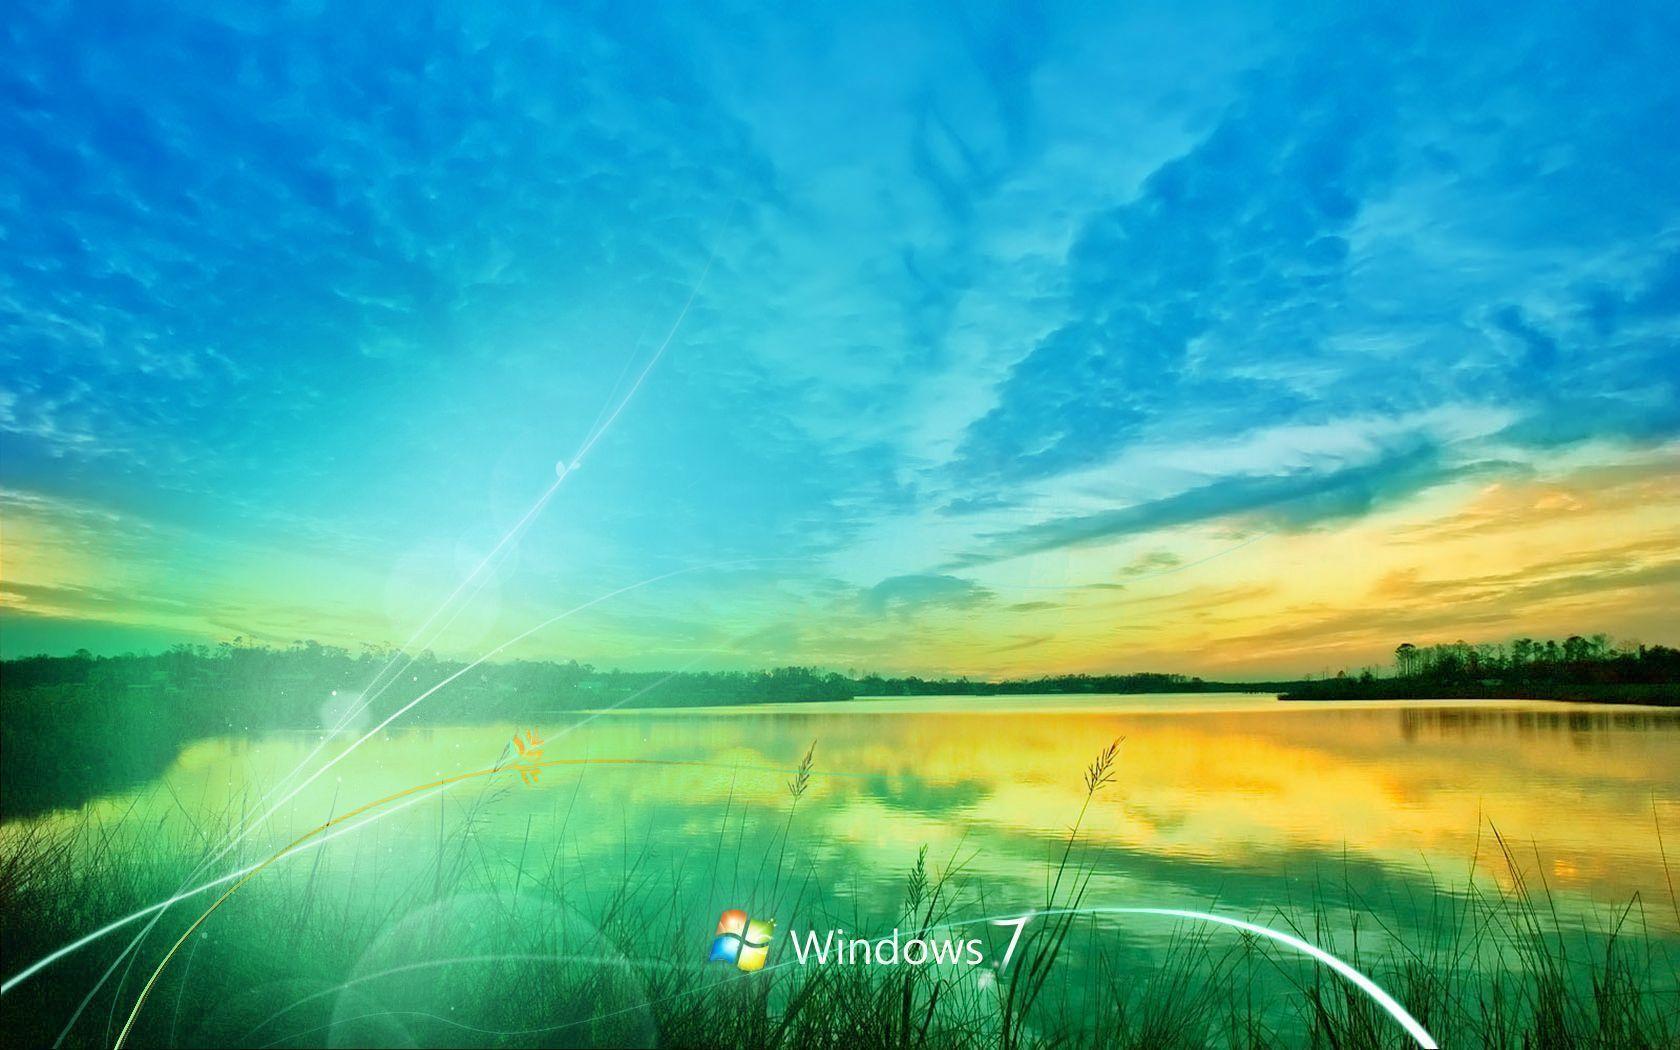 Windows Seven. Awesome Wallpaper